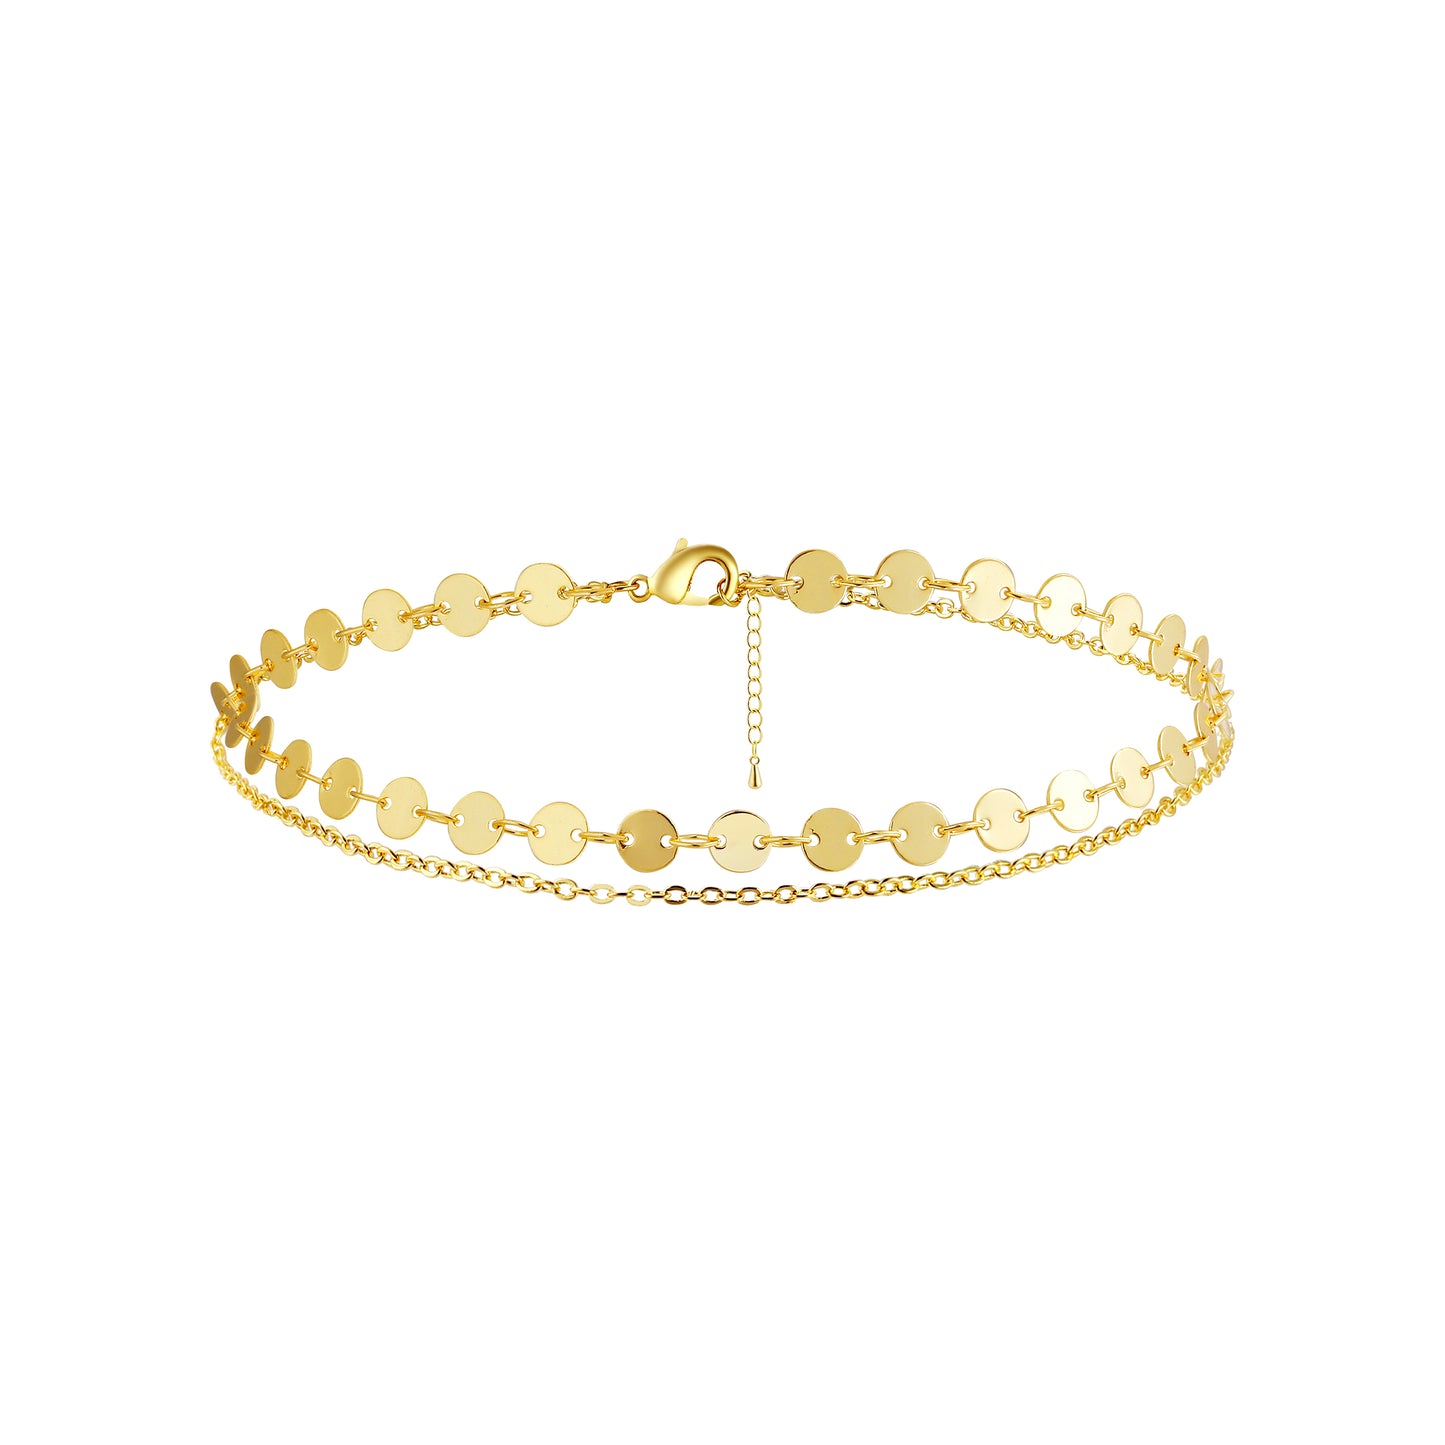 TASISO Gold Filled Layered Anklet with Coin Chain Layering Foot Bracelet